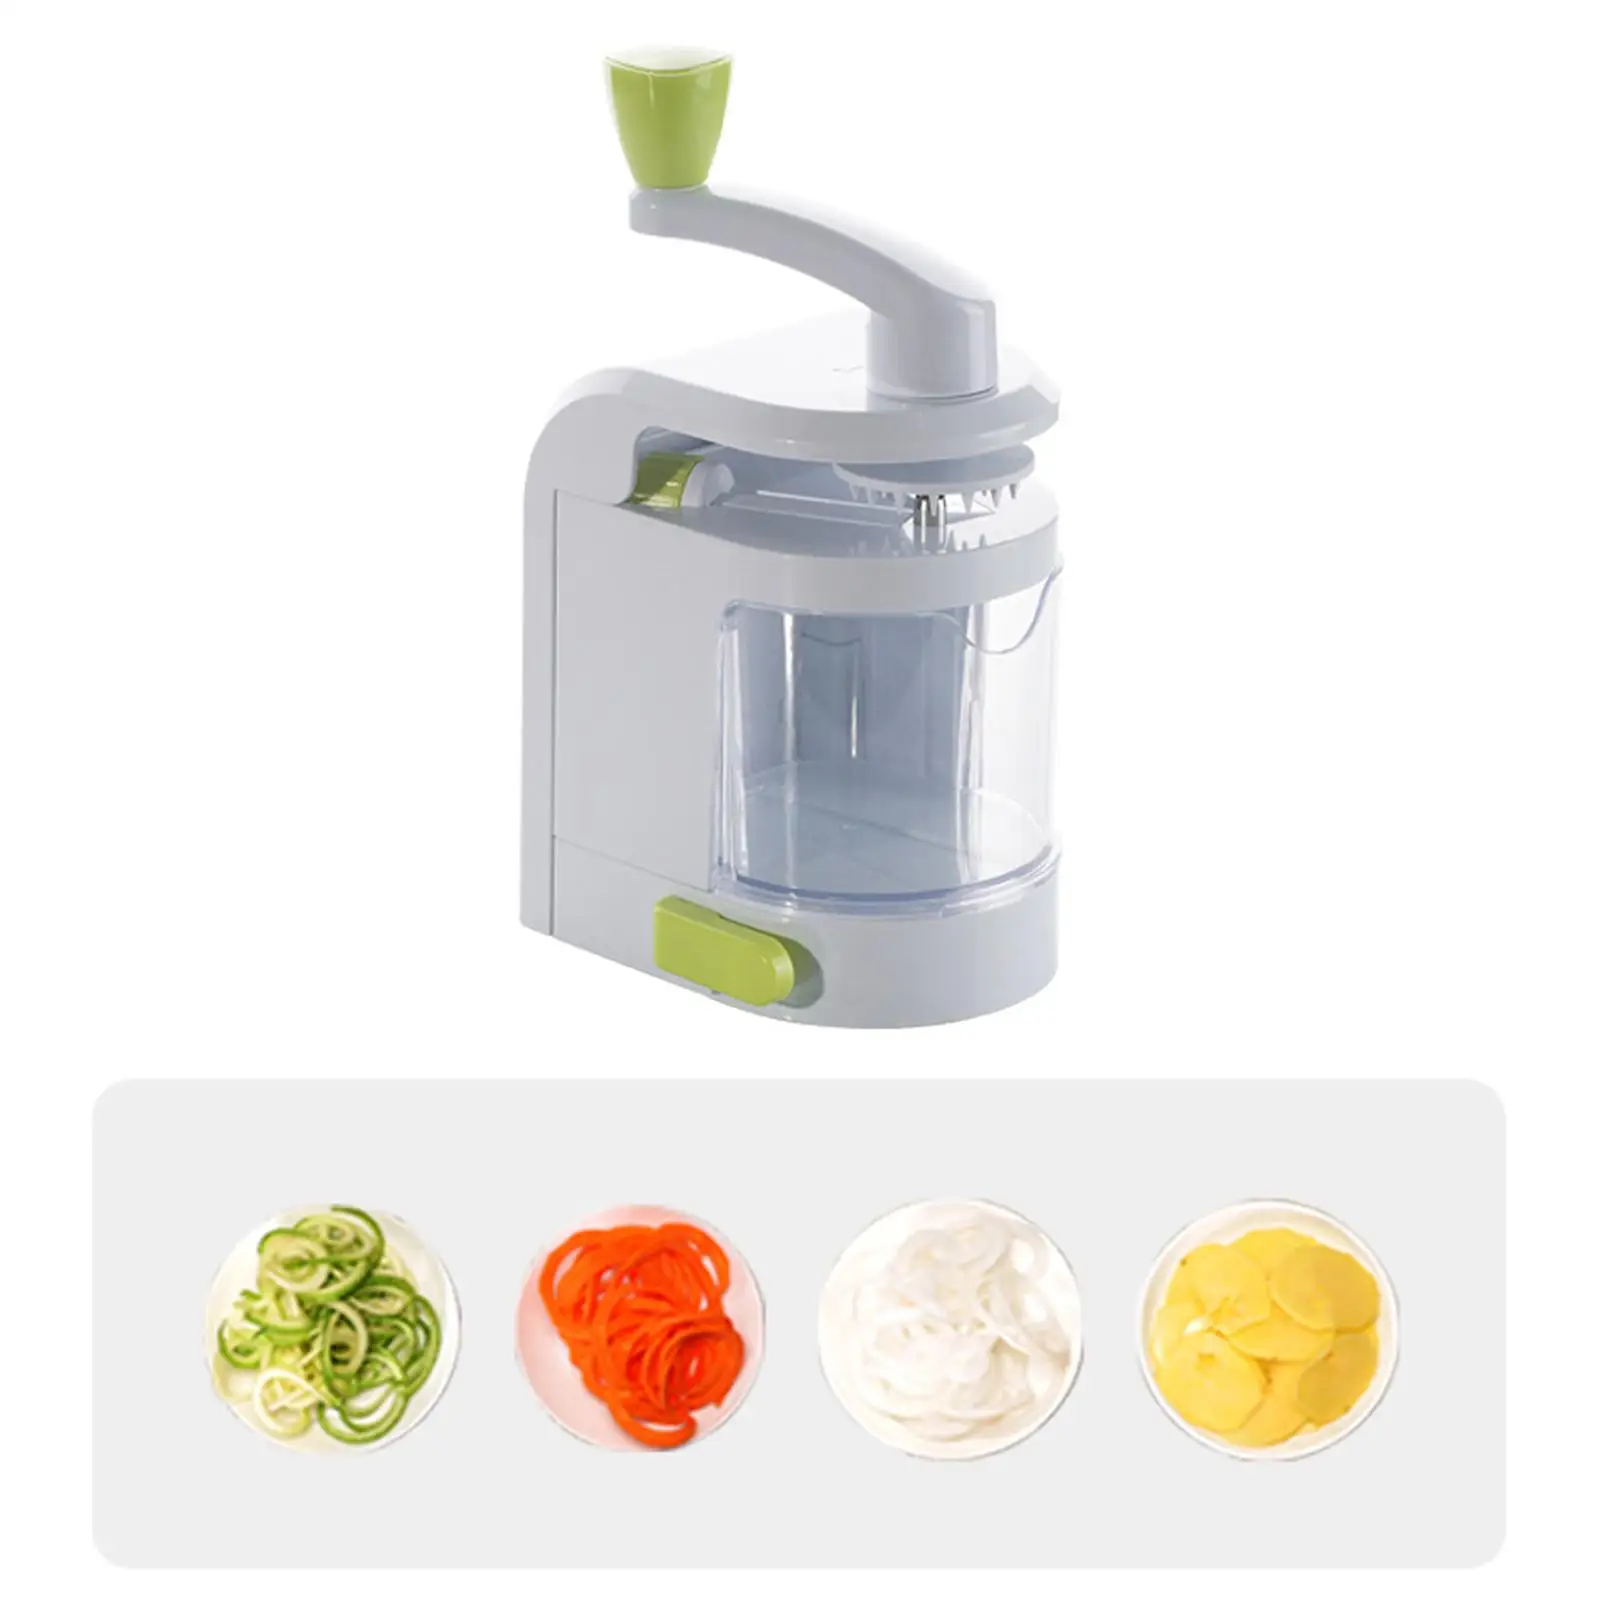 Rotary cheese Shredder, Vegetable Cutter, Fruits Shredder Kitchen Tools Easy to Clean Vegetable , for Onion Carrots Nuts